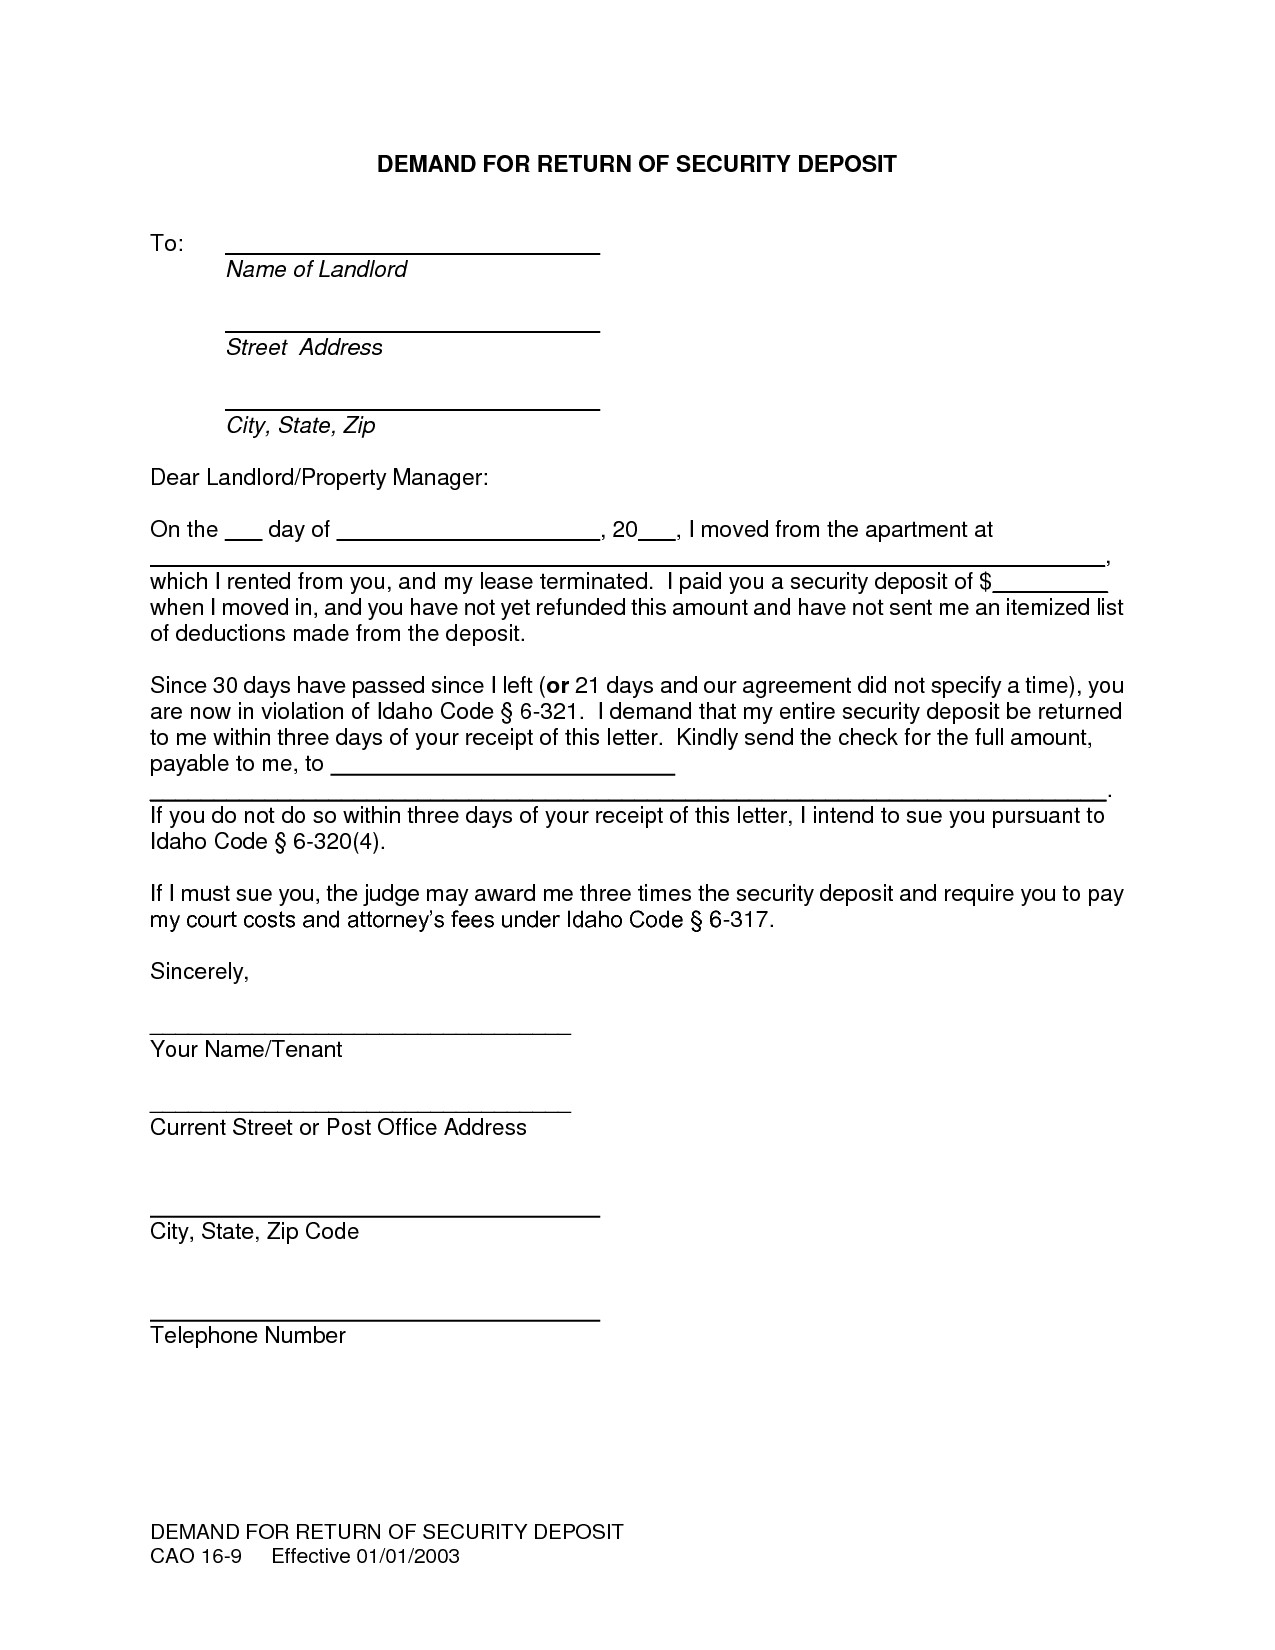 Security Deposit Demand Letter Template Florida - Return Security Deposit Letter Demand Landlord Impression so